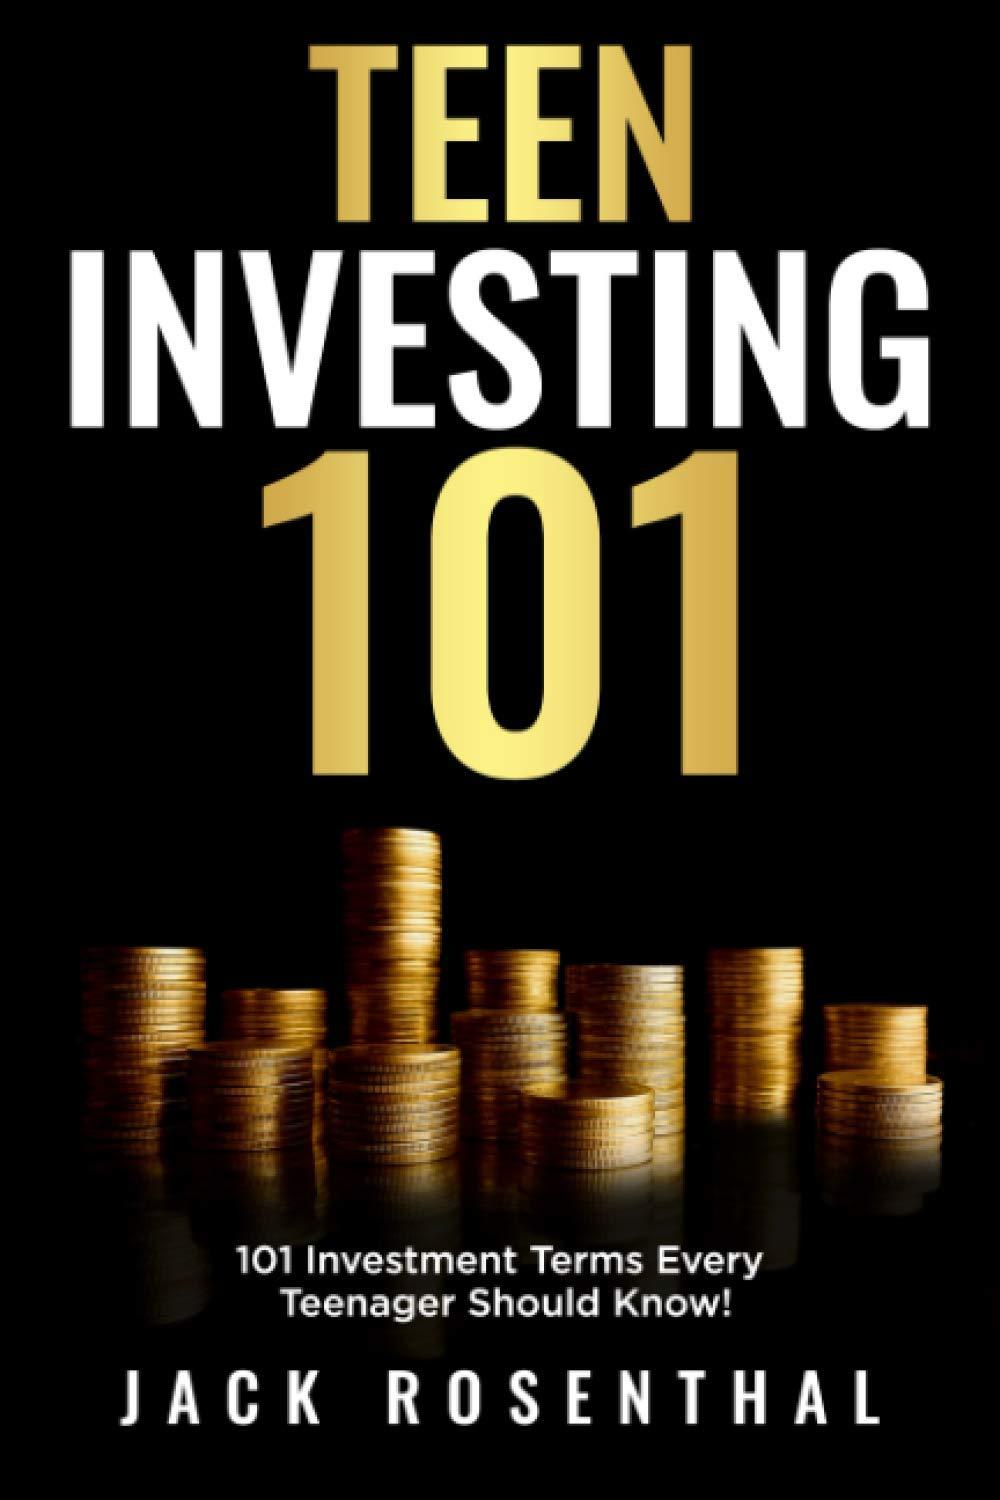 teen investing 101 101 investment terms every teenager should know 1st edition jack rosenthal b08zq7ntgh,